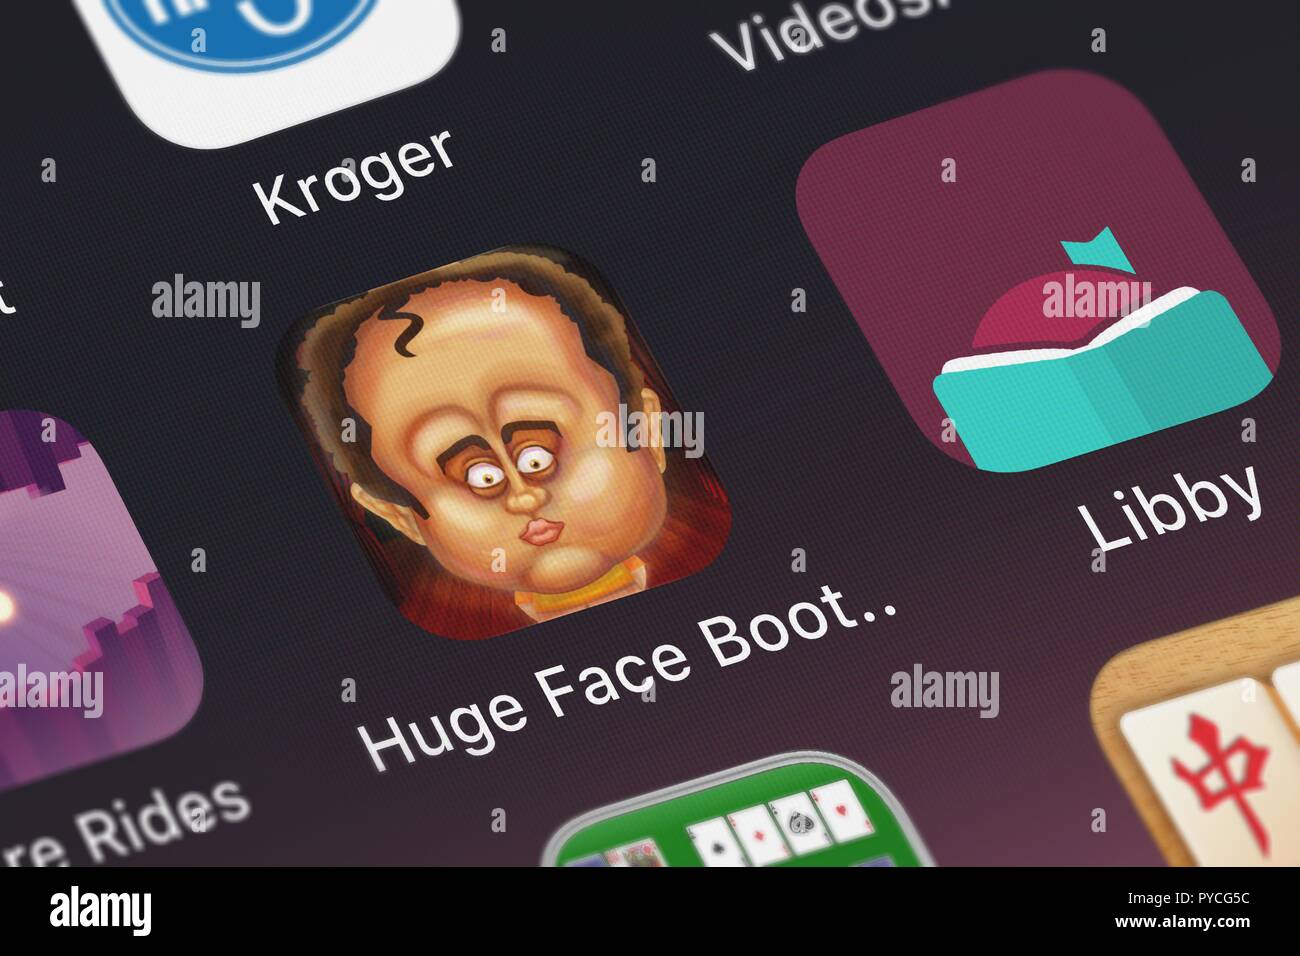 London, United Kingdom - October 26, 2018: Close-up of the Huge Face Booth Lite icon from Pop-ok.com on an iPhone. Stock Photo